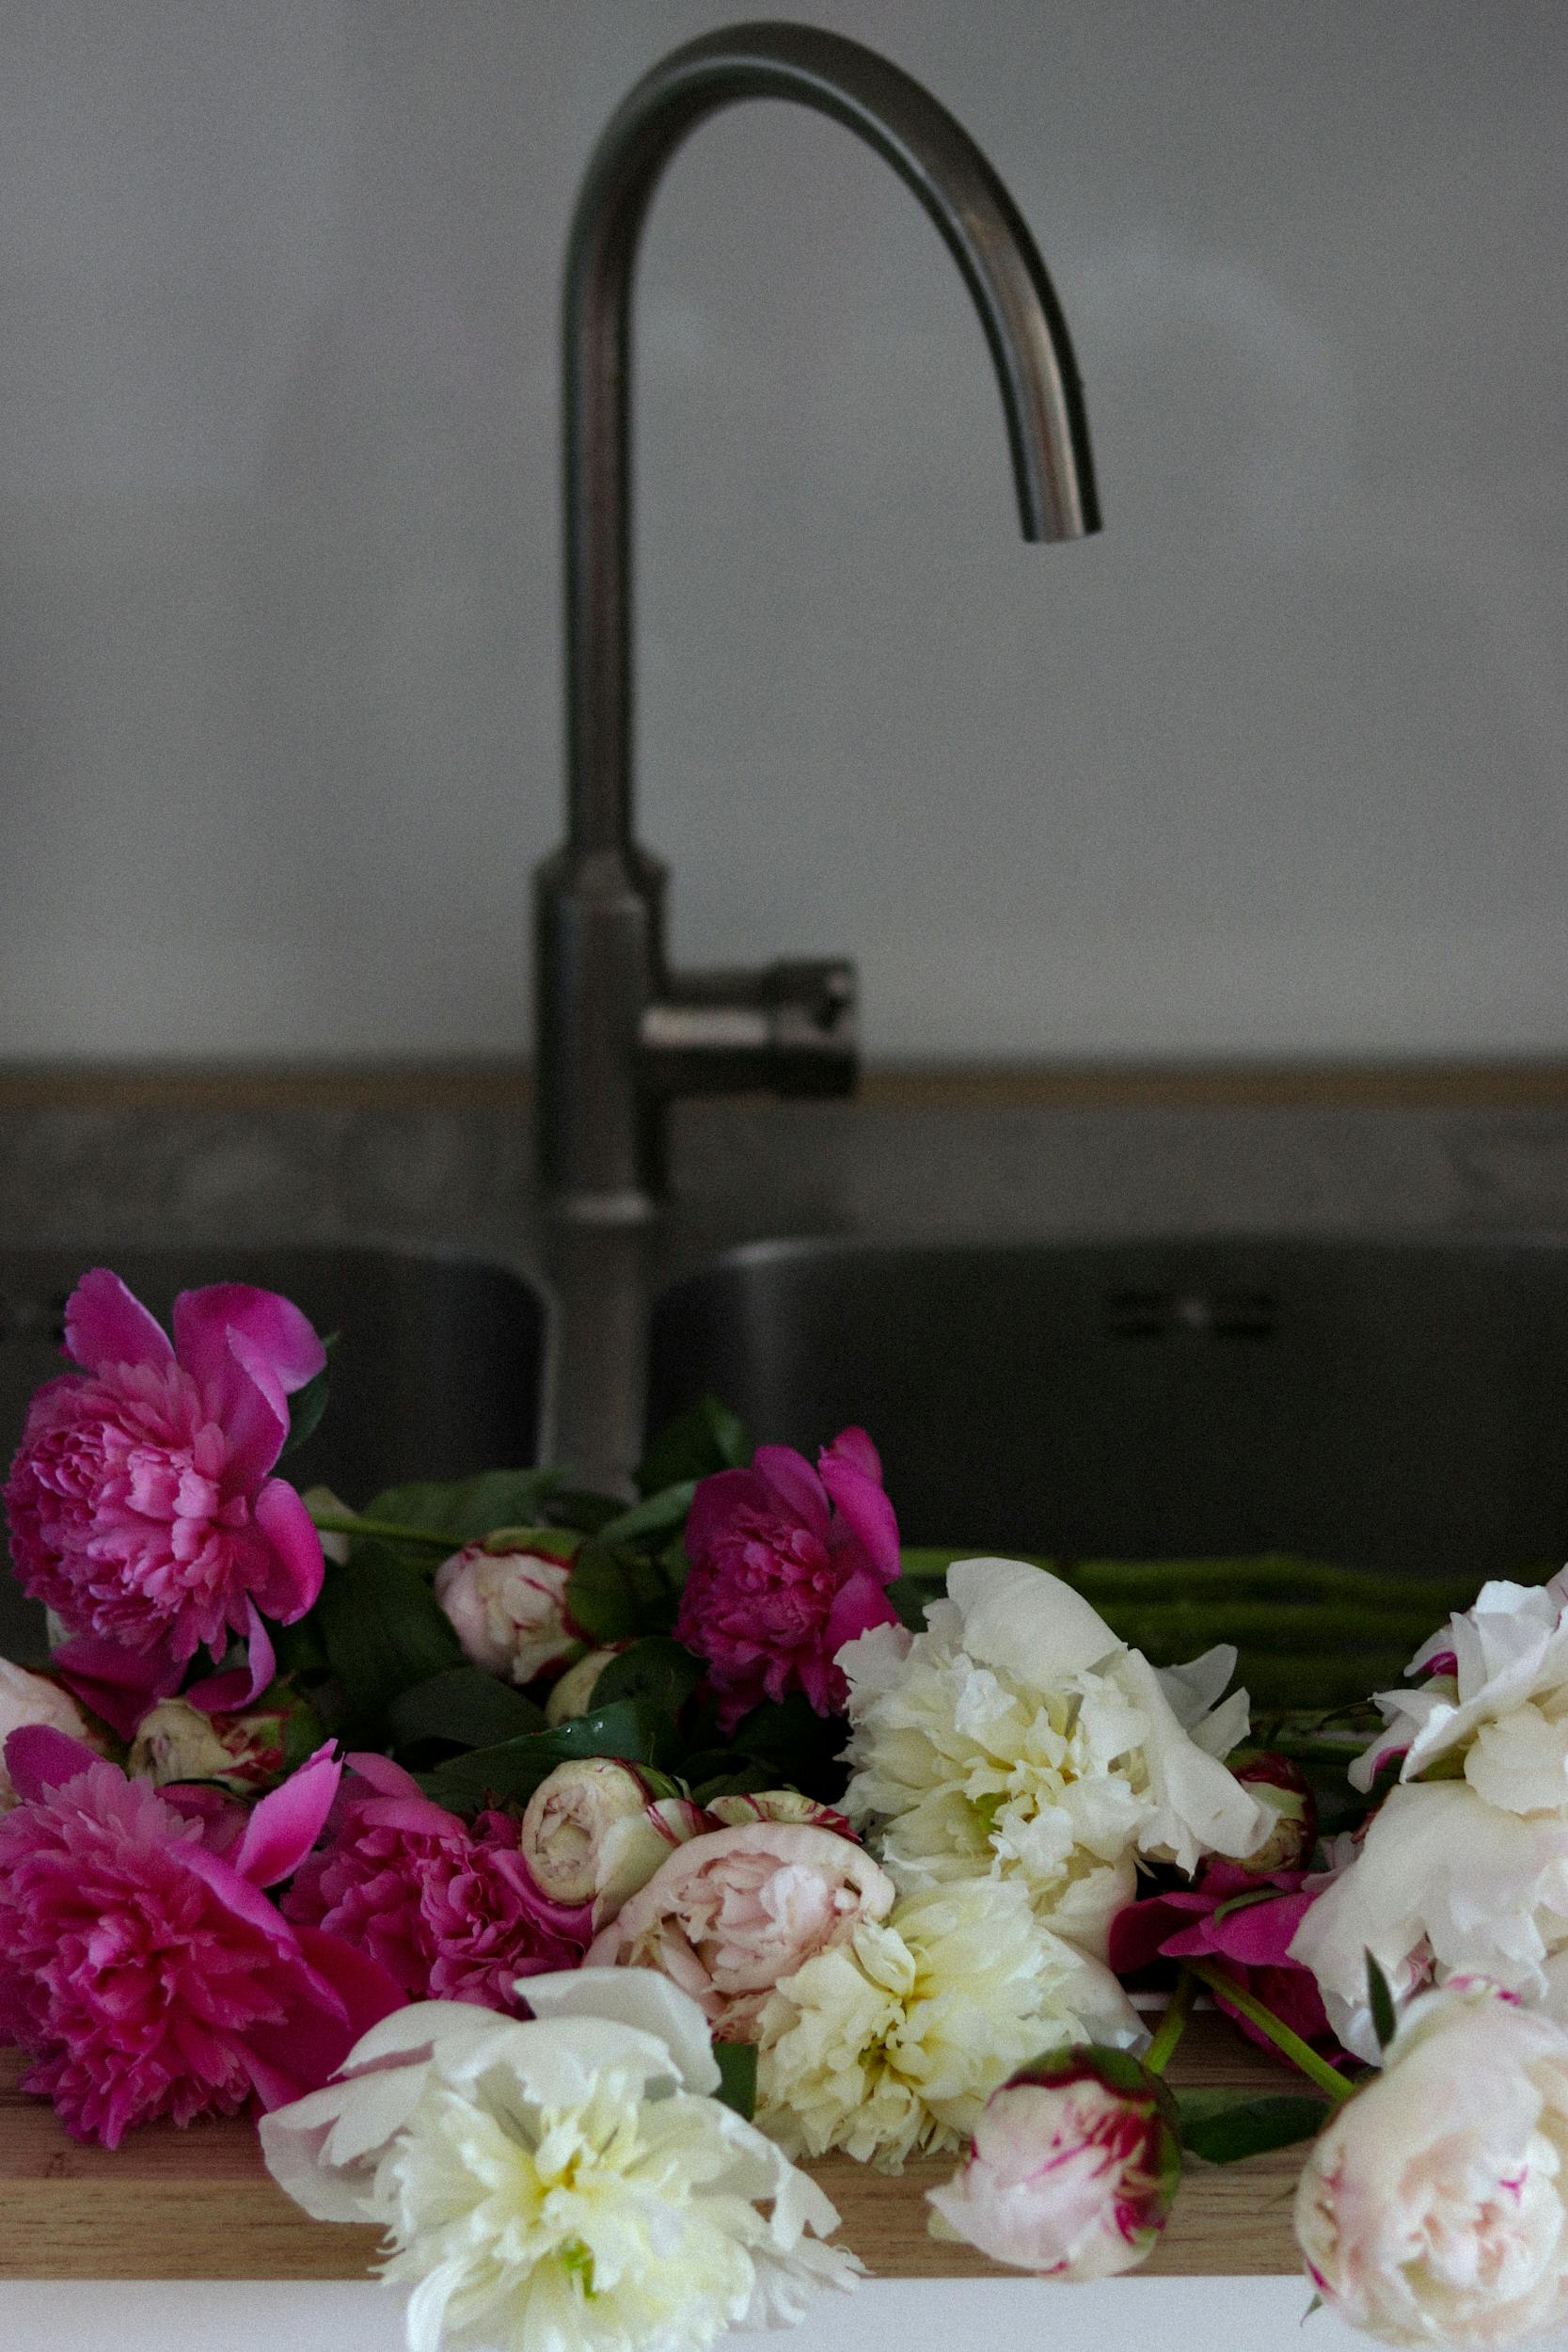 Fragrant fresh peony flowers of bright pink and white colors with stems placed in kitchen basin